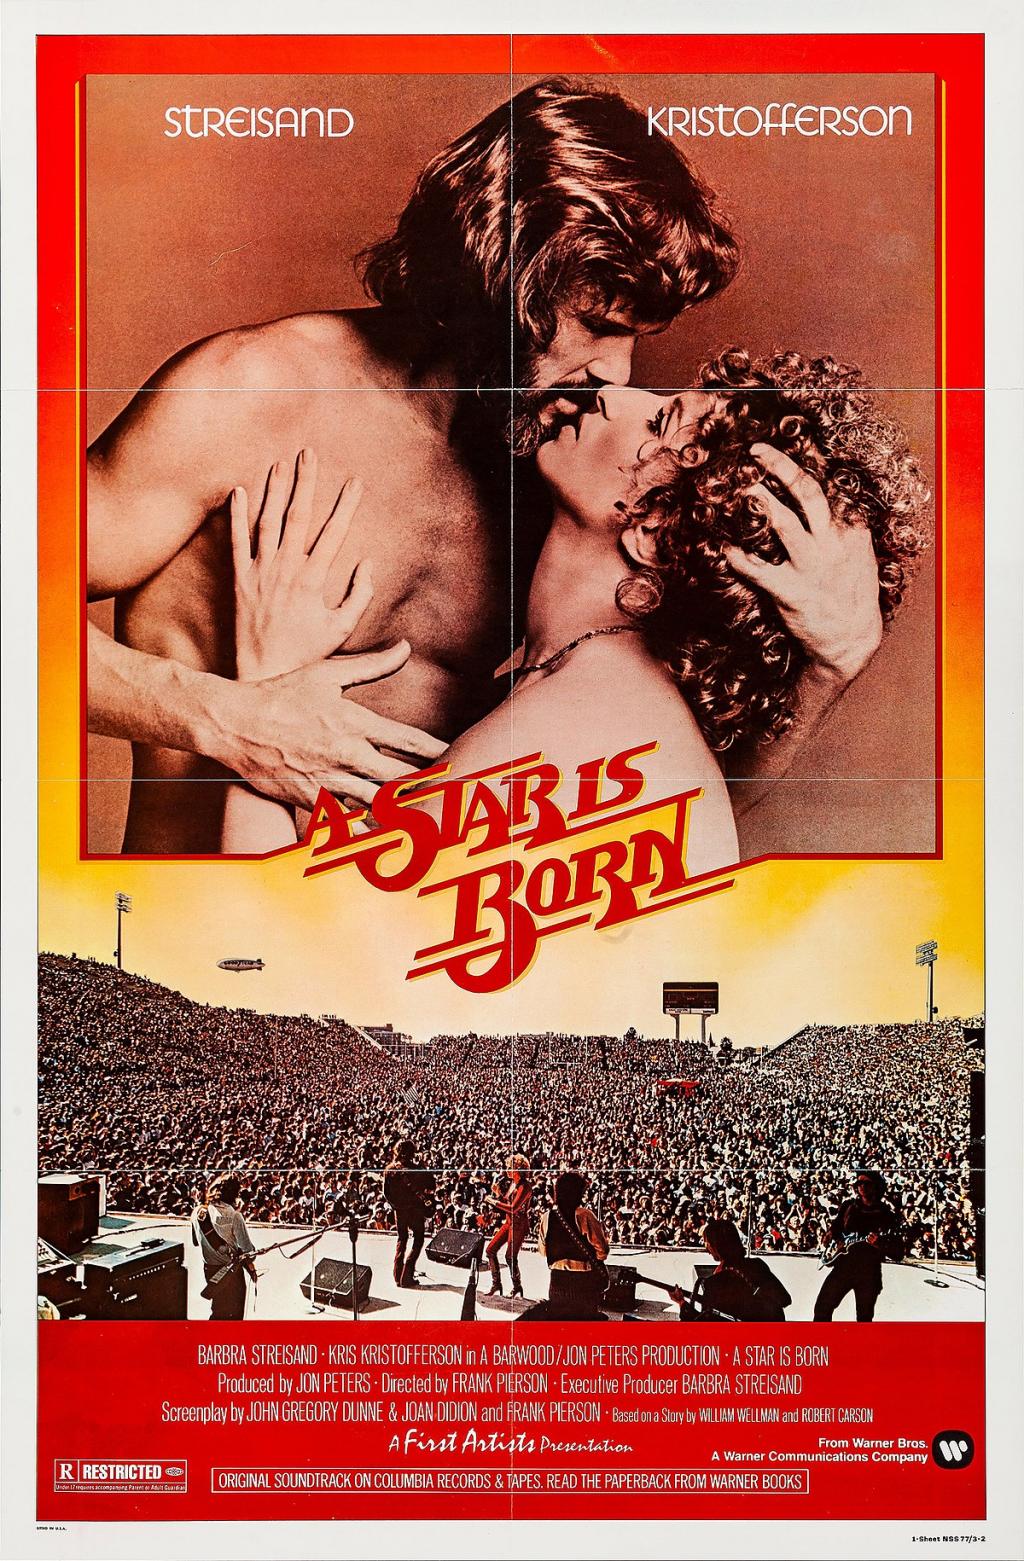 1200px-A_Star_Is_Born_(1976_film_poster).jpg